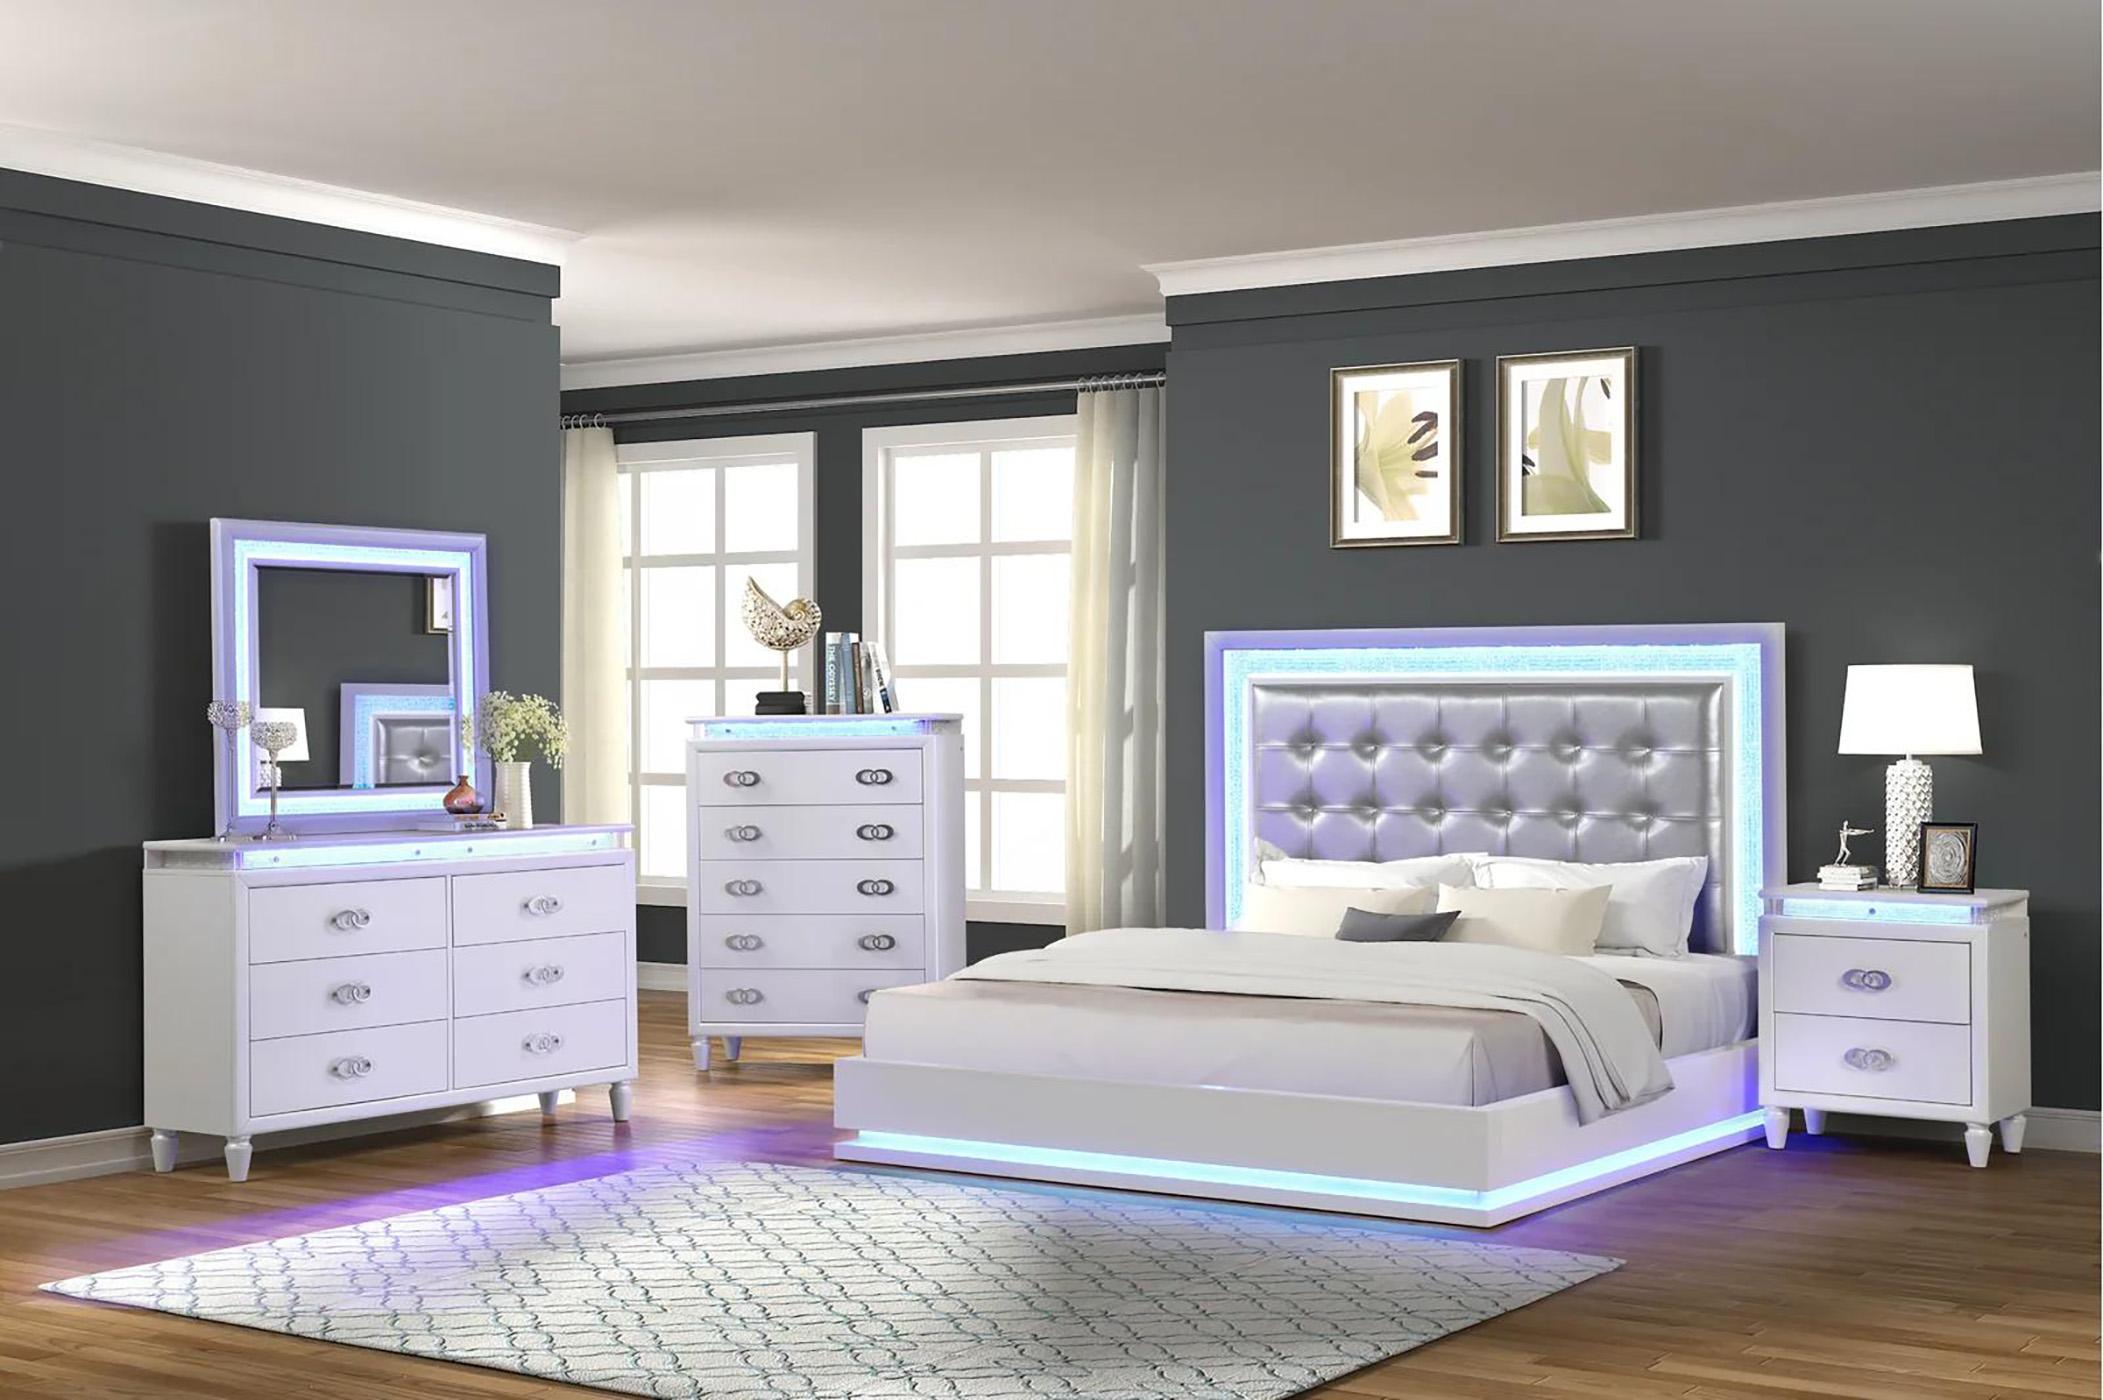 

    
Milky White Tufted King Led Bedroom Set 5P PASSION Galaxy Home Contemporary
